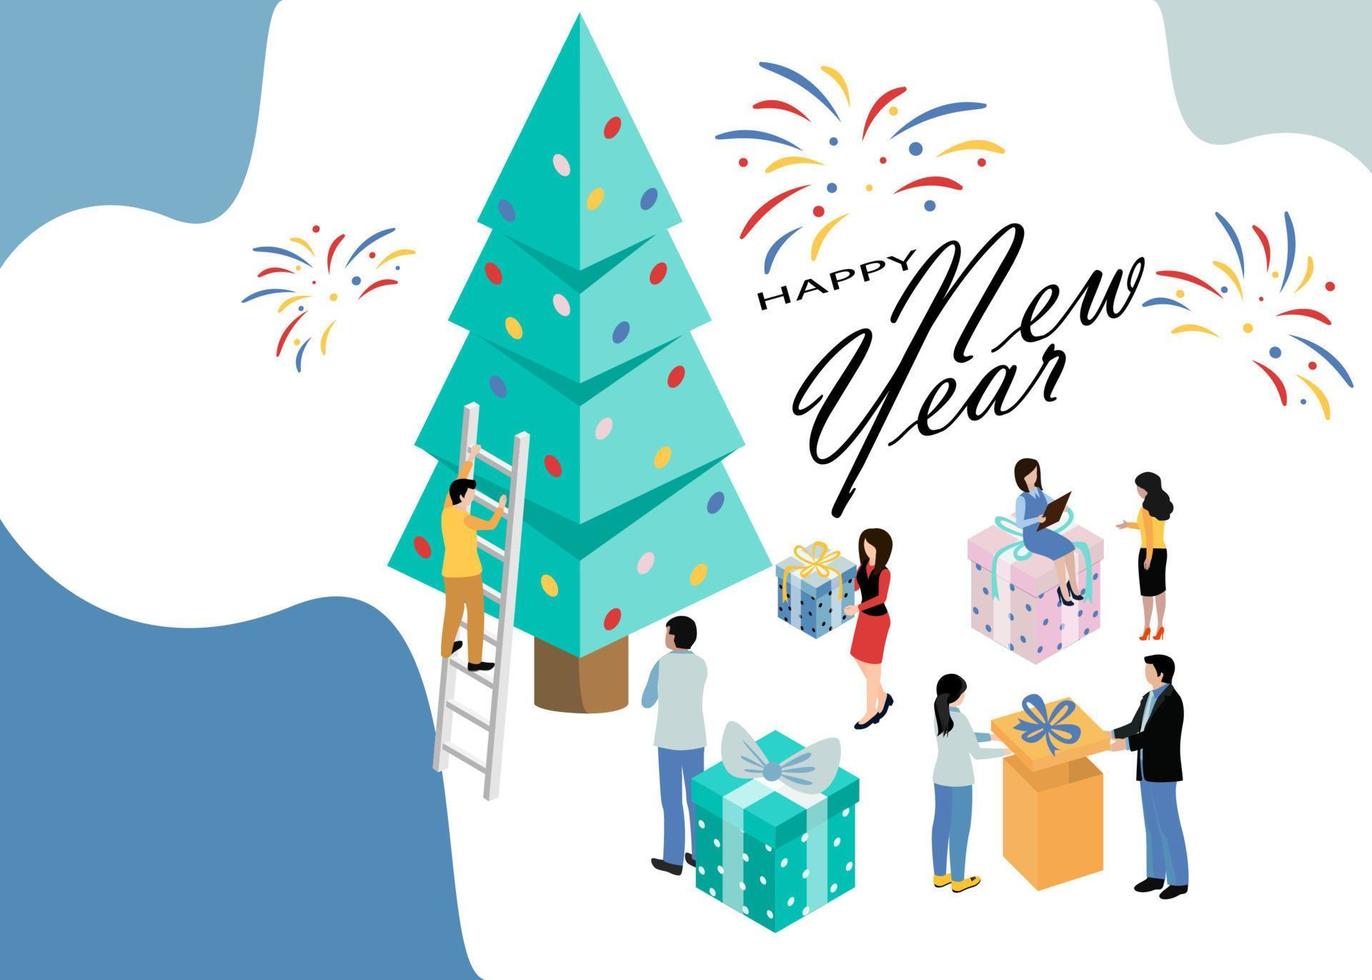 Merry Christmas and Happy New Year. Happy holidays. Vector illustration. EPS 10